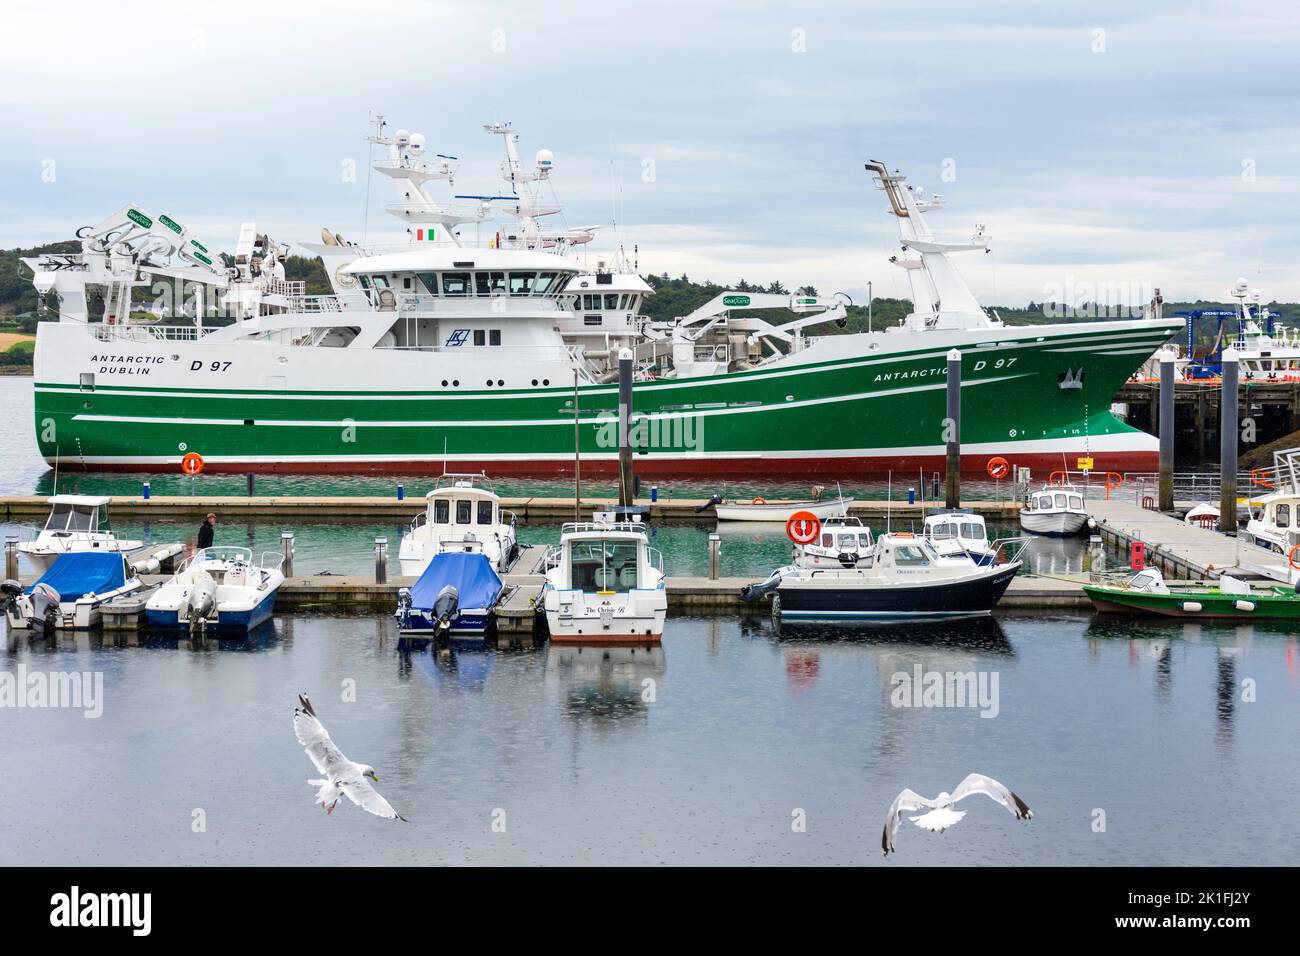 Killybegs fishing port harbour in County Donegal, Ireland Stock Photo